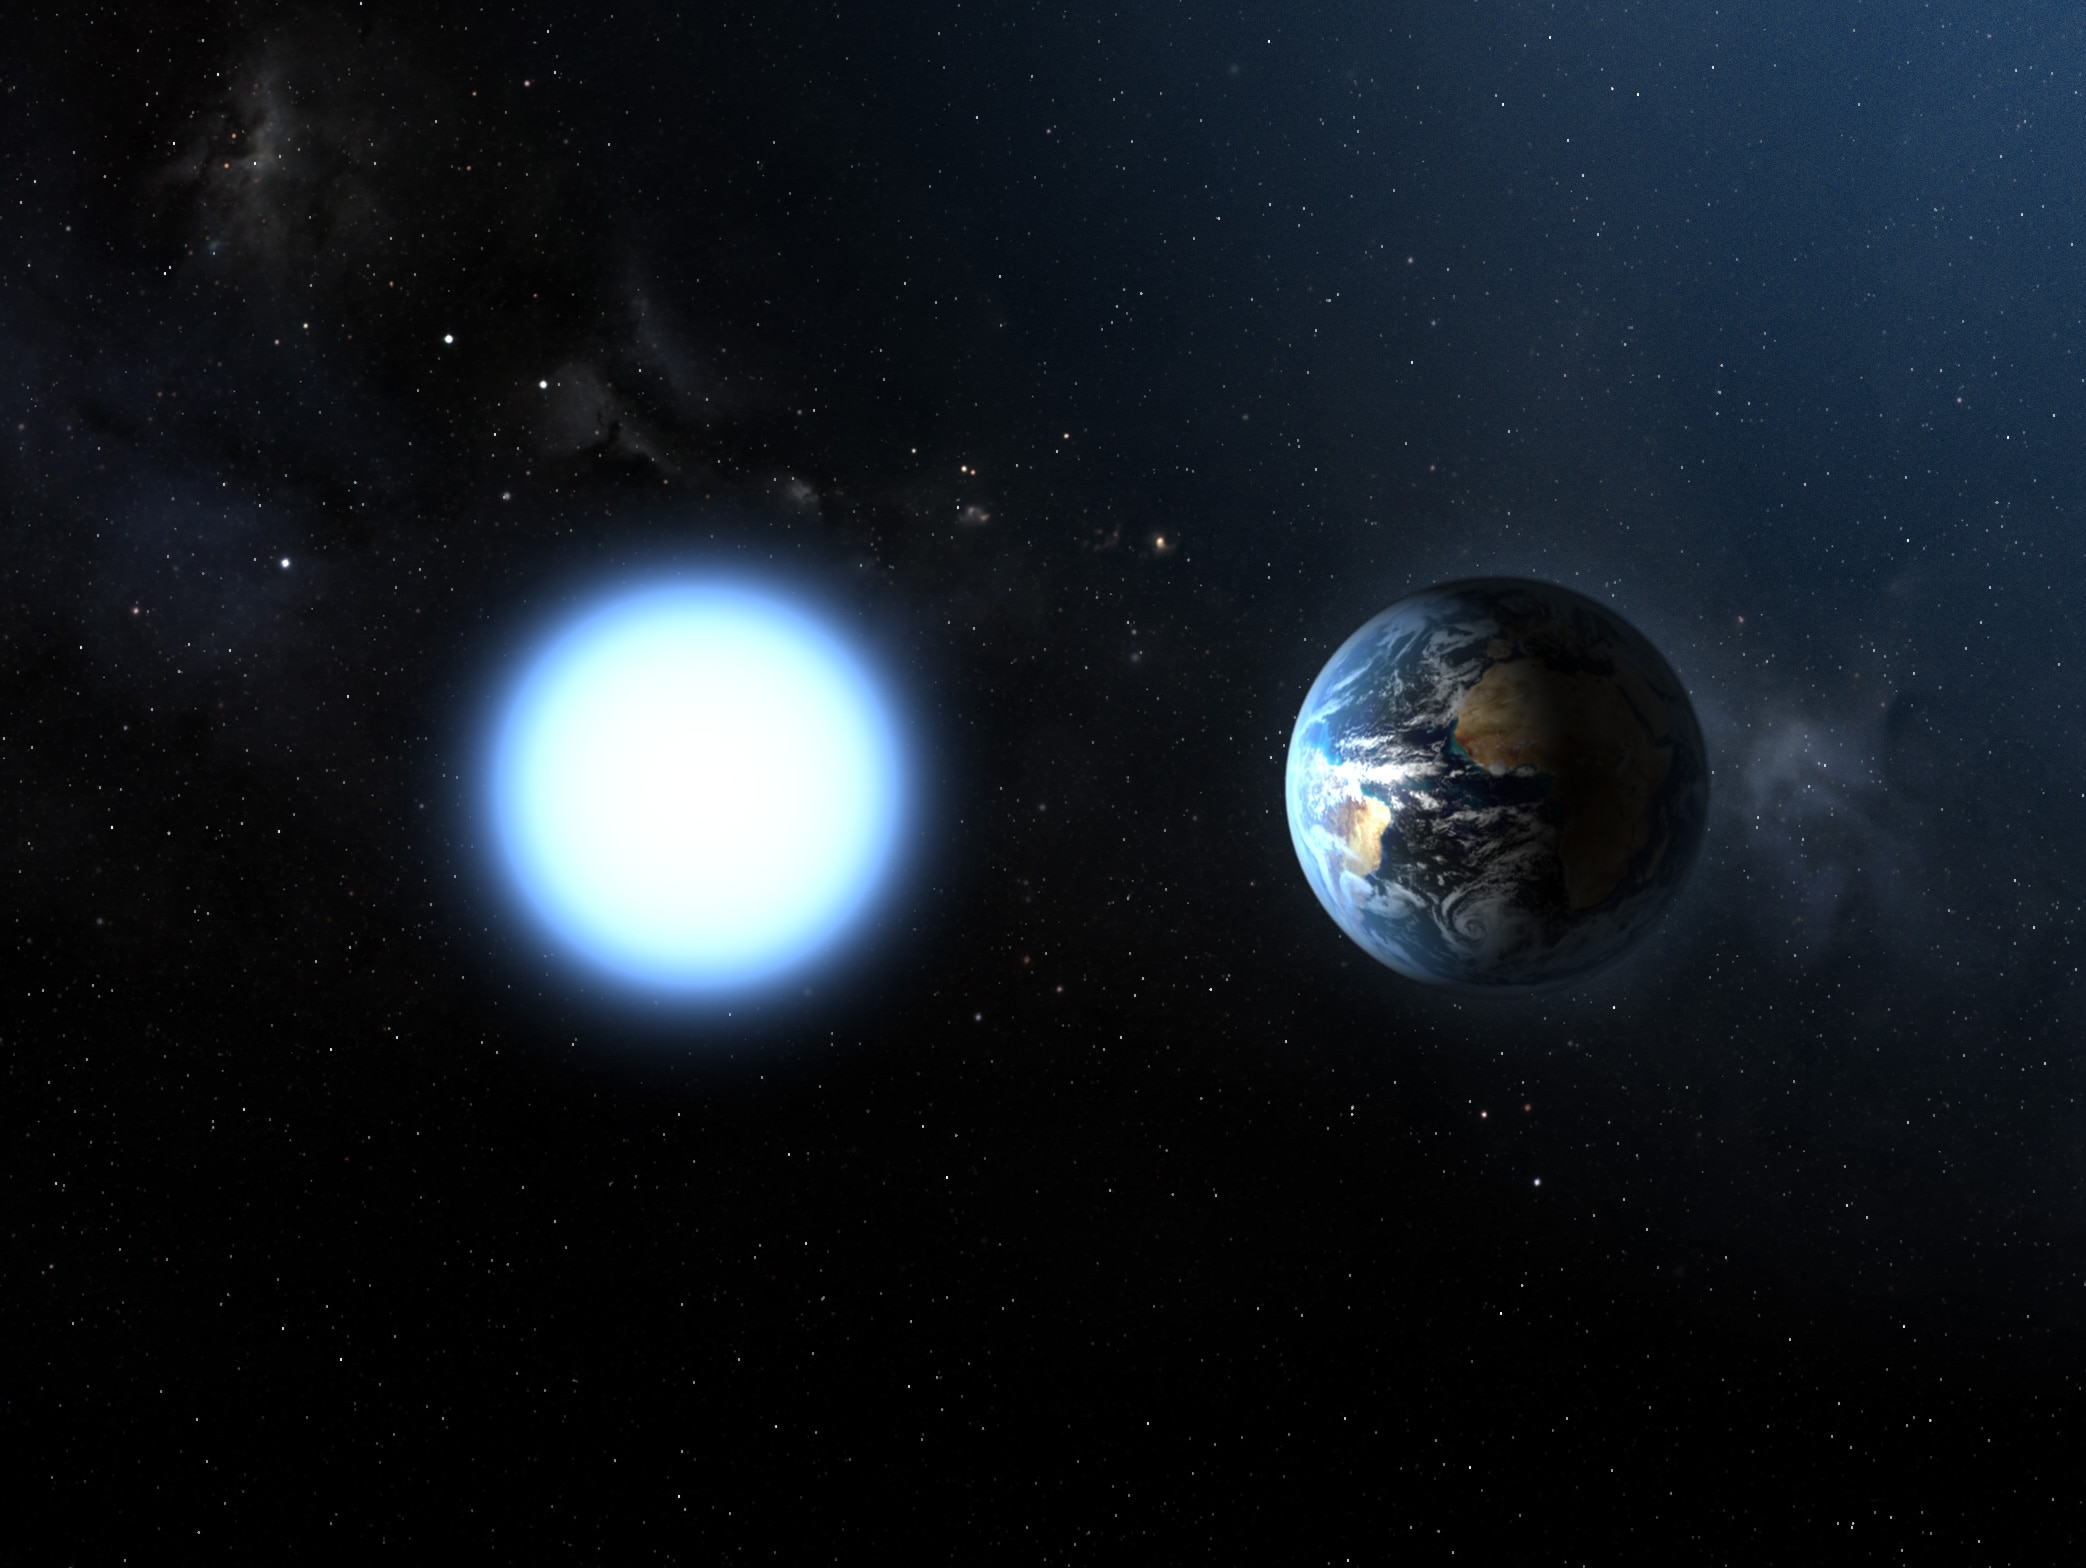 No planets seen for Sirius B, the nearest white dwarf to Earth